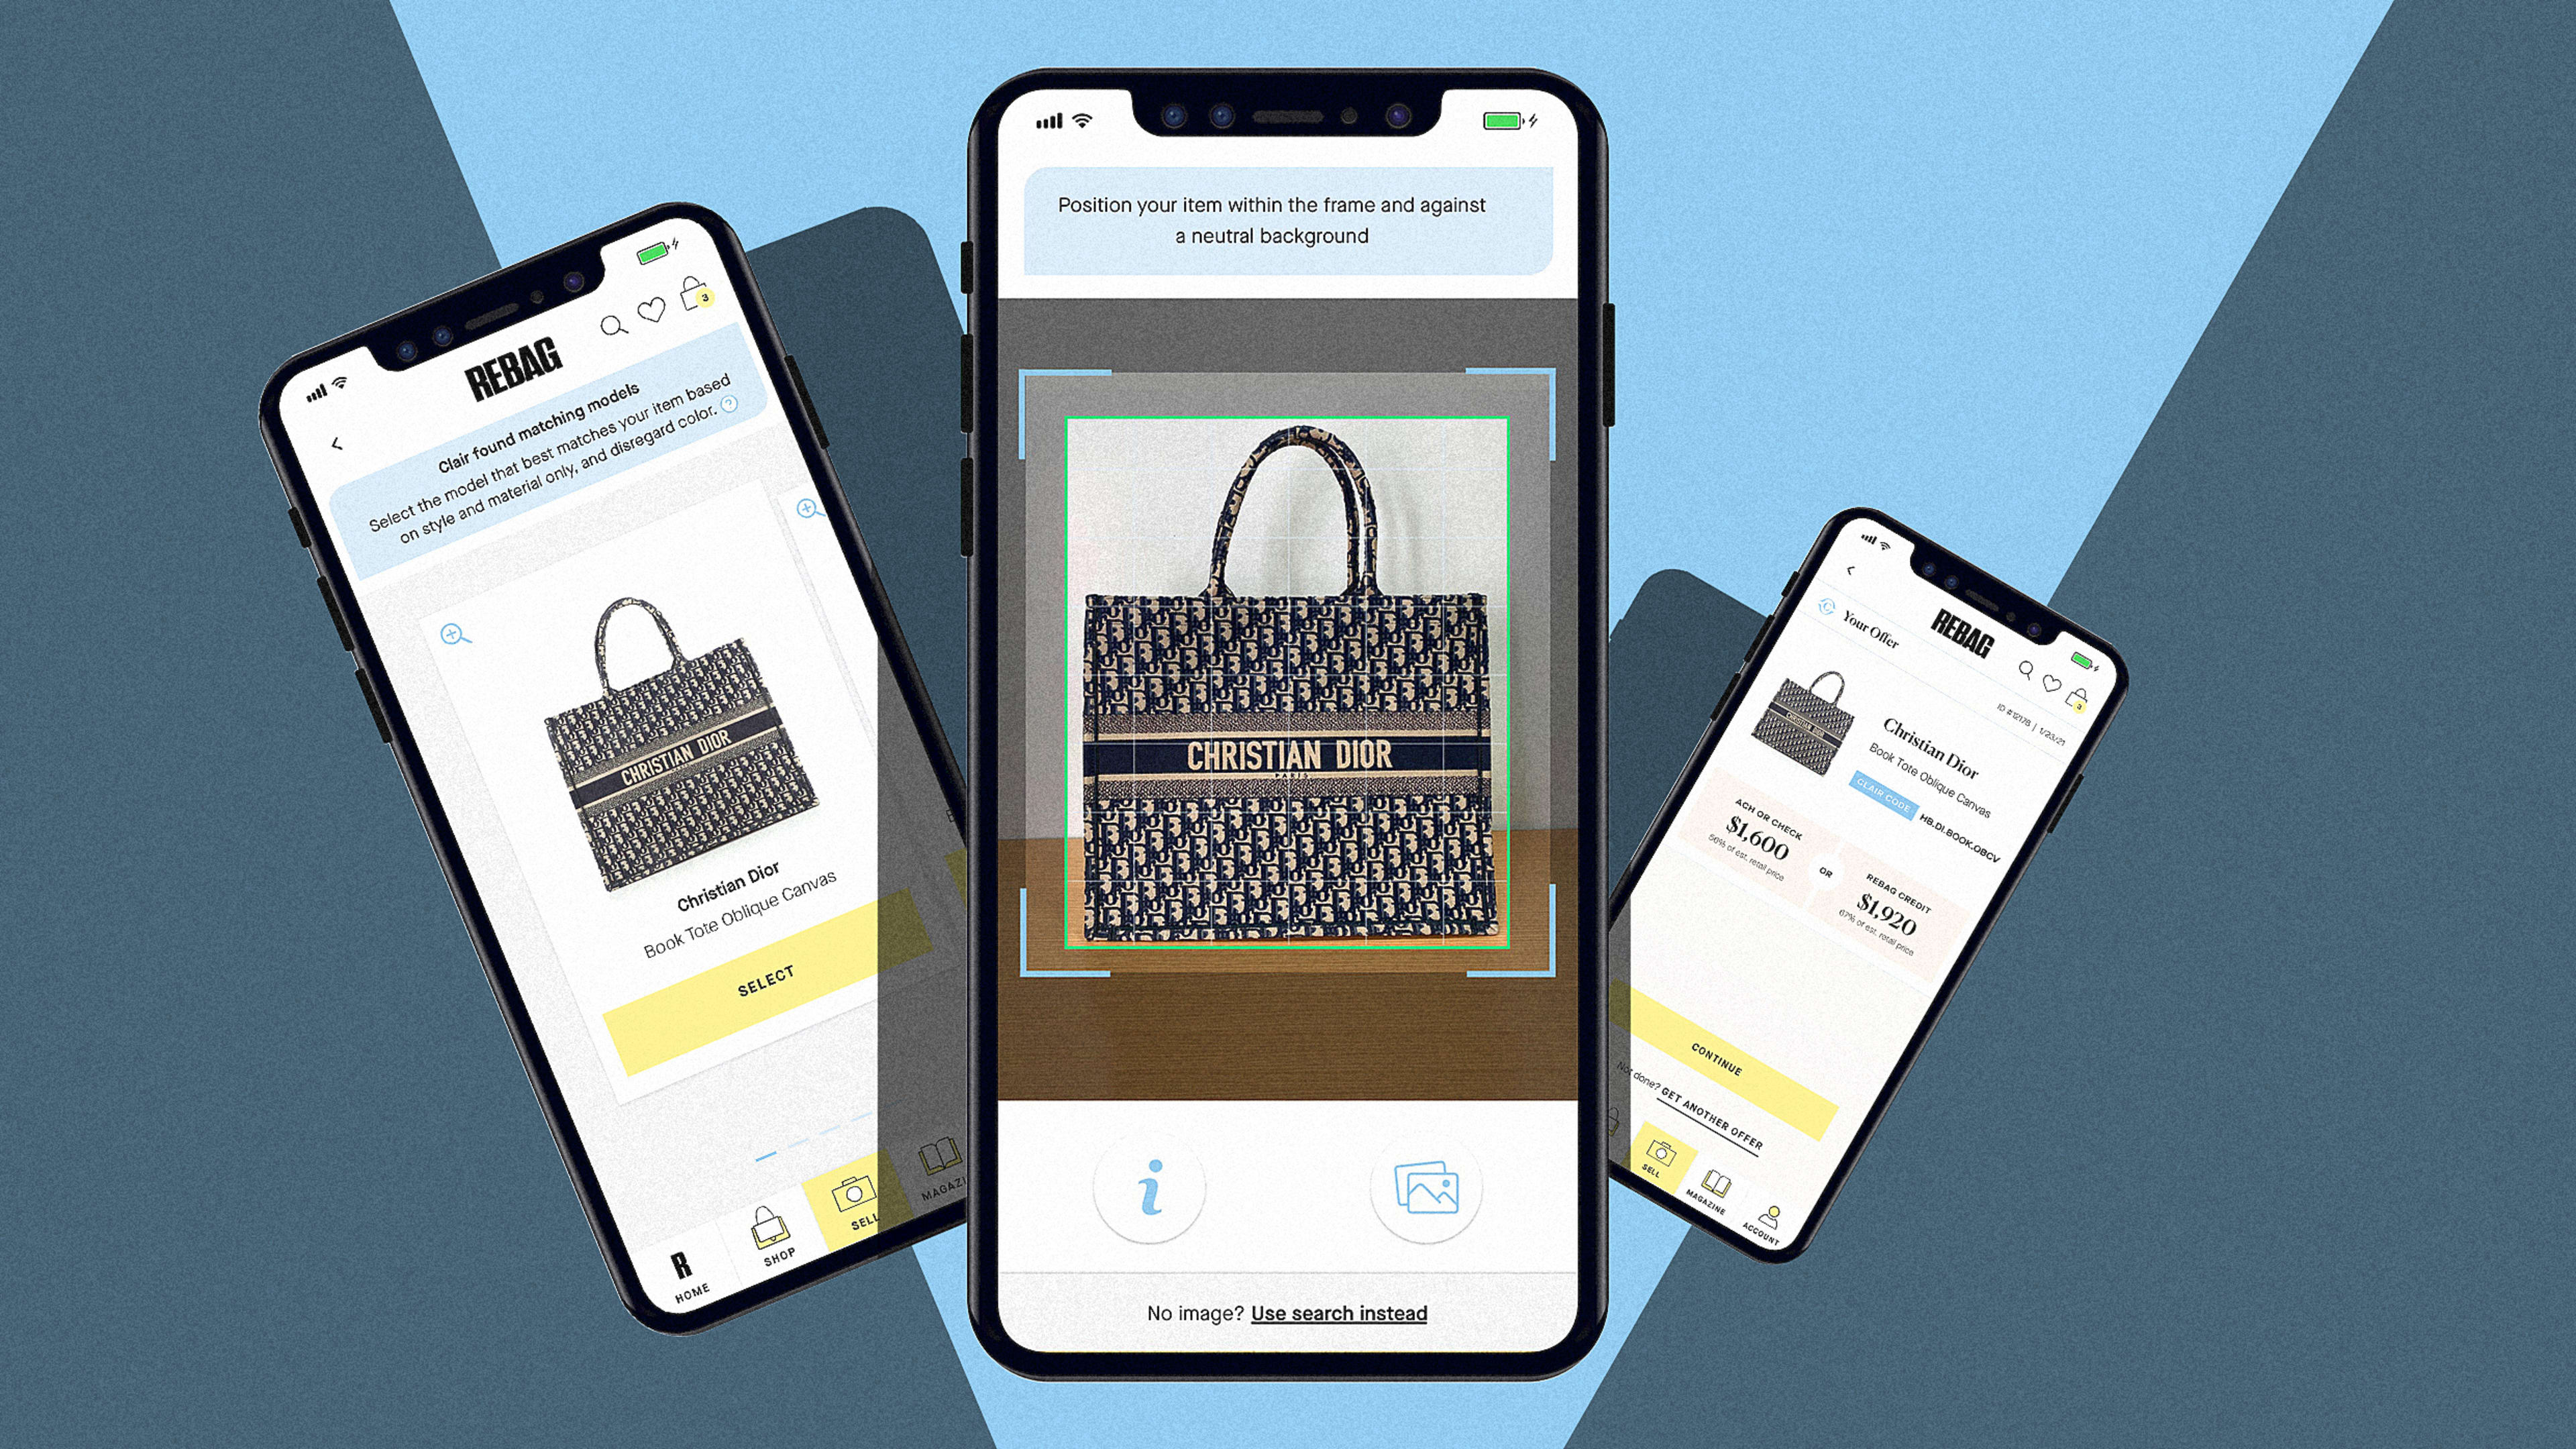 Just how valuable is that luxury bag? This app can tell you instantly